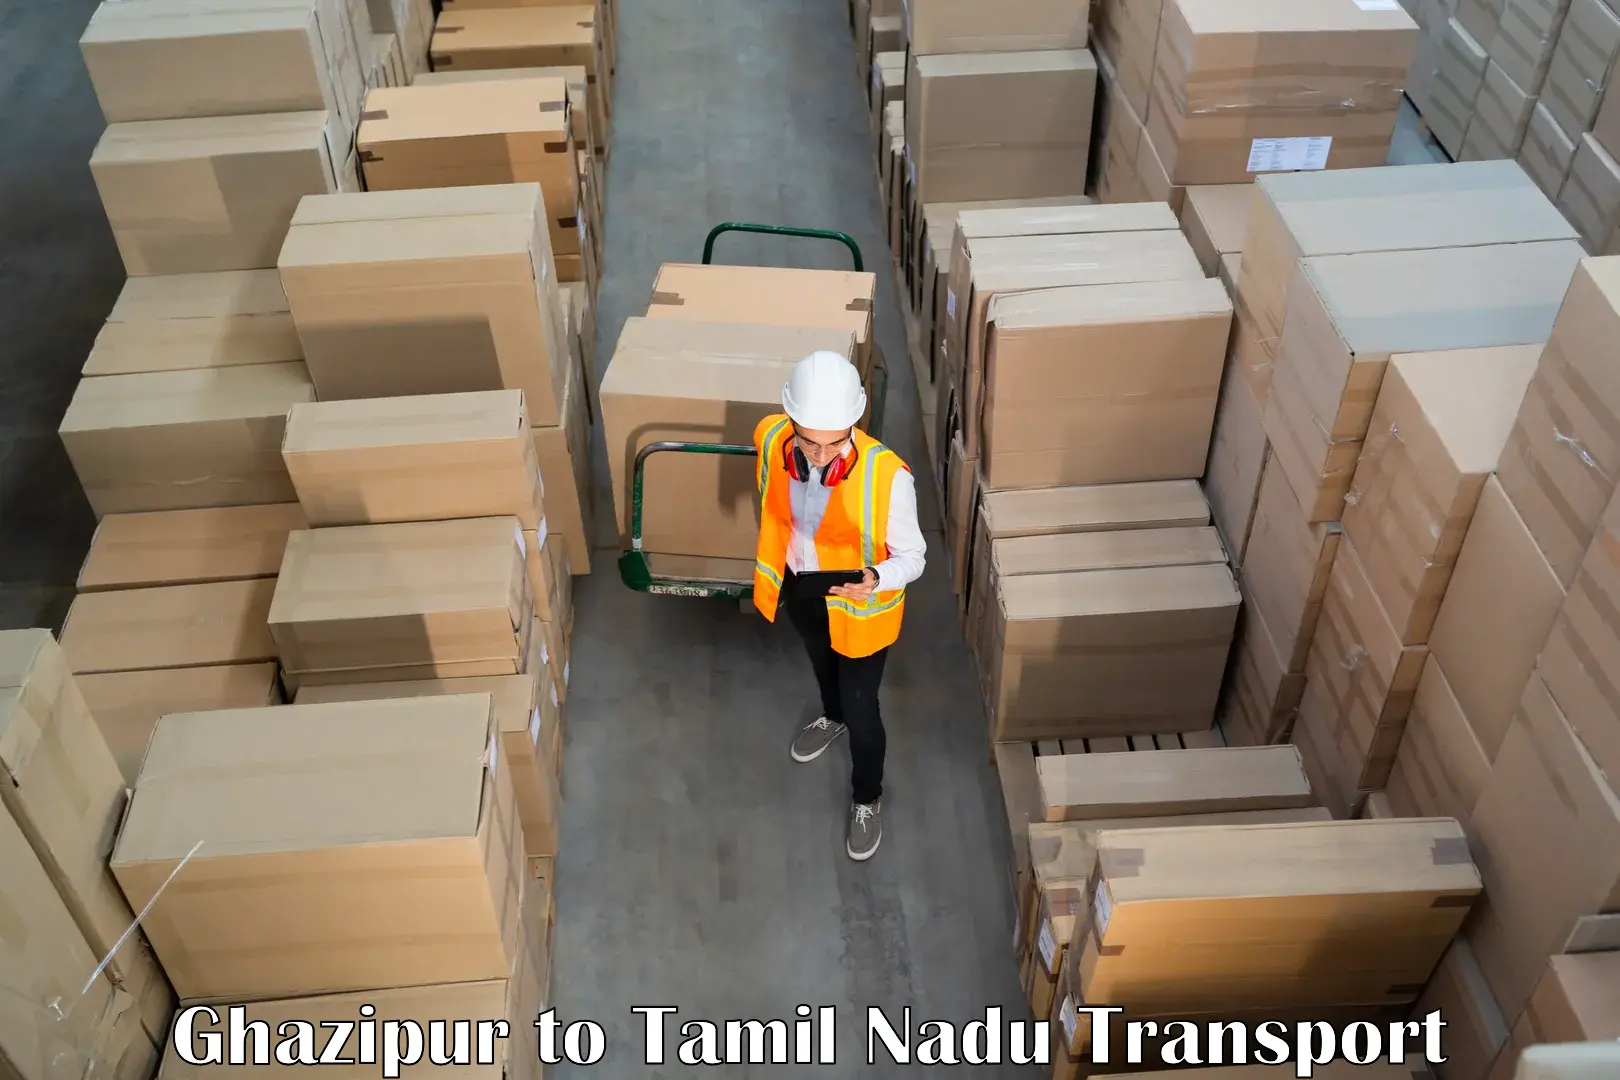 Online transport service Ghazipur to Palayankottai